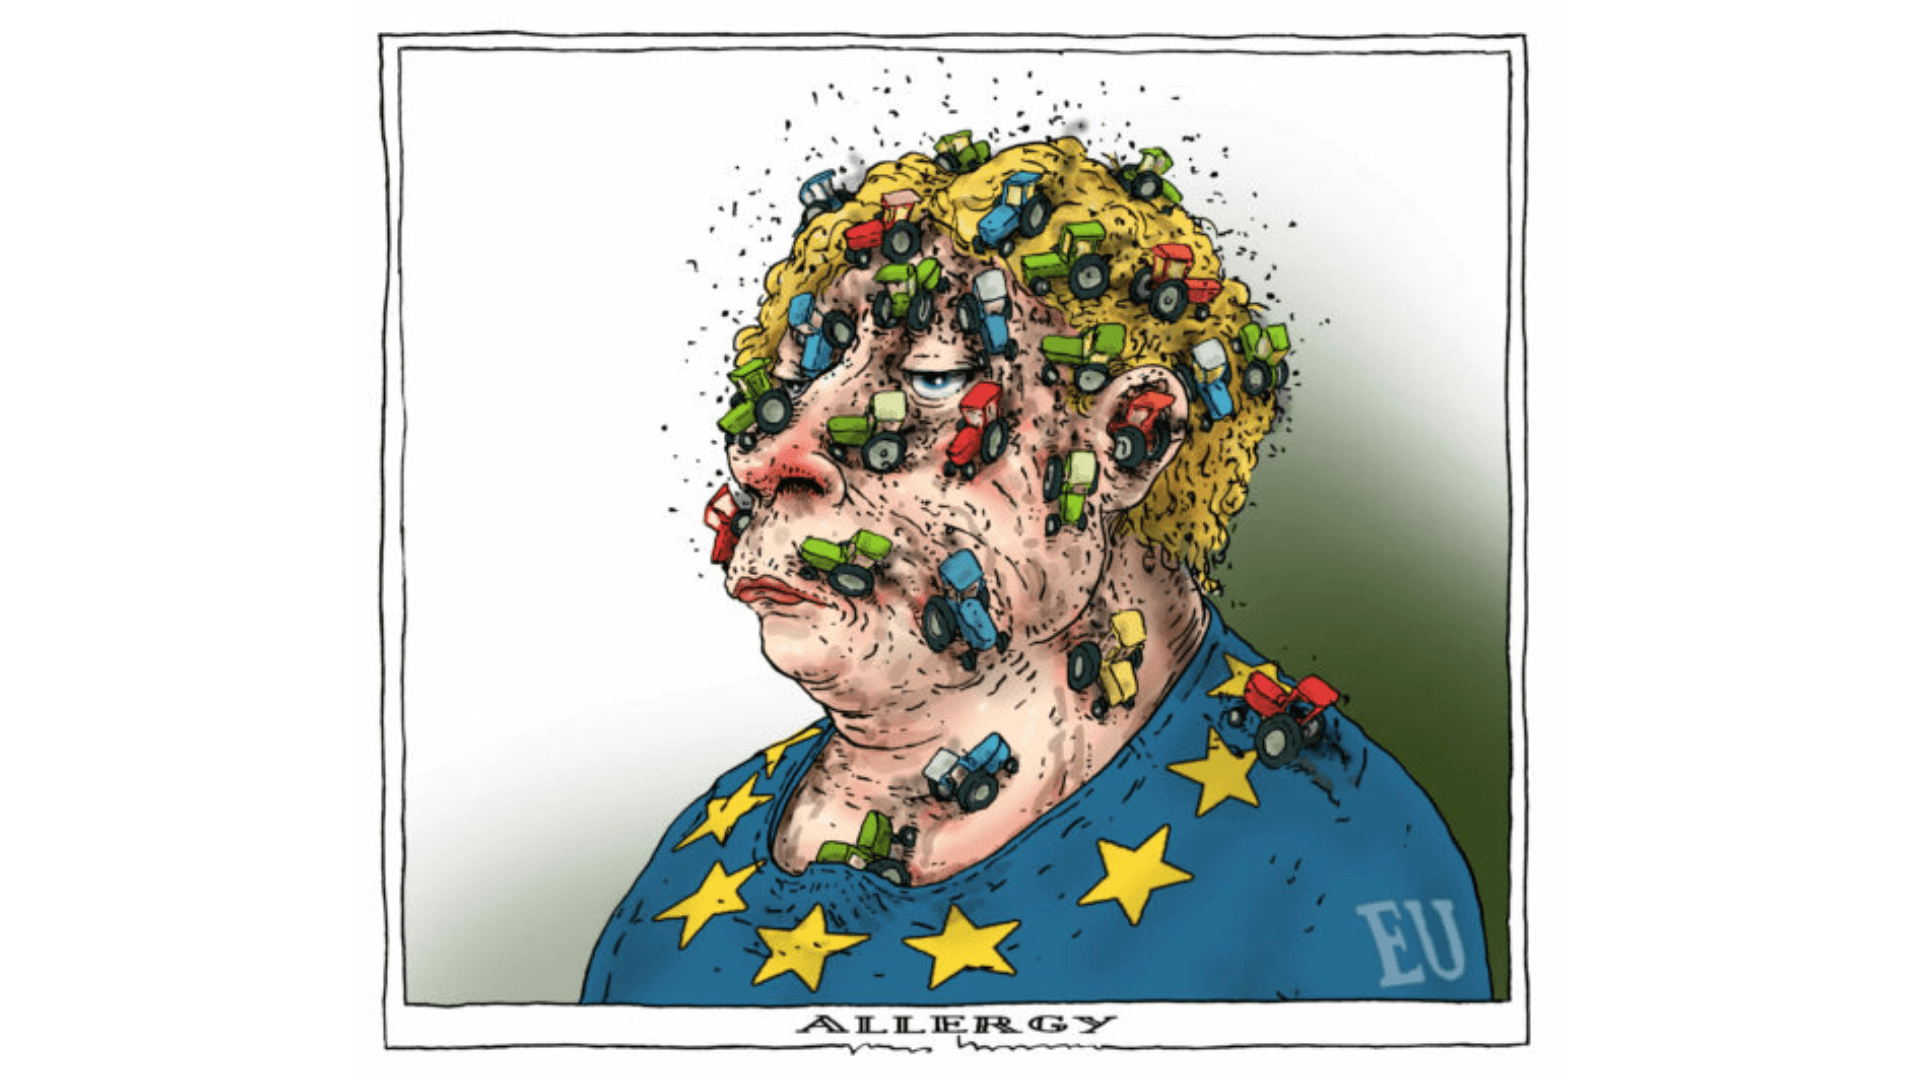 Illustration of a person wearing a EU sweater covered in small tractors